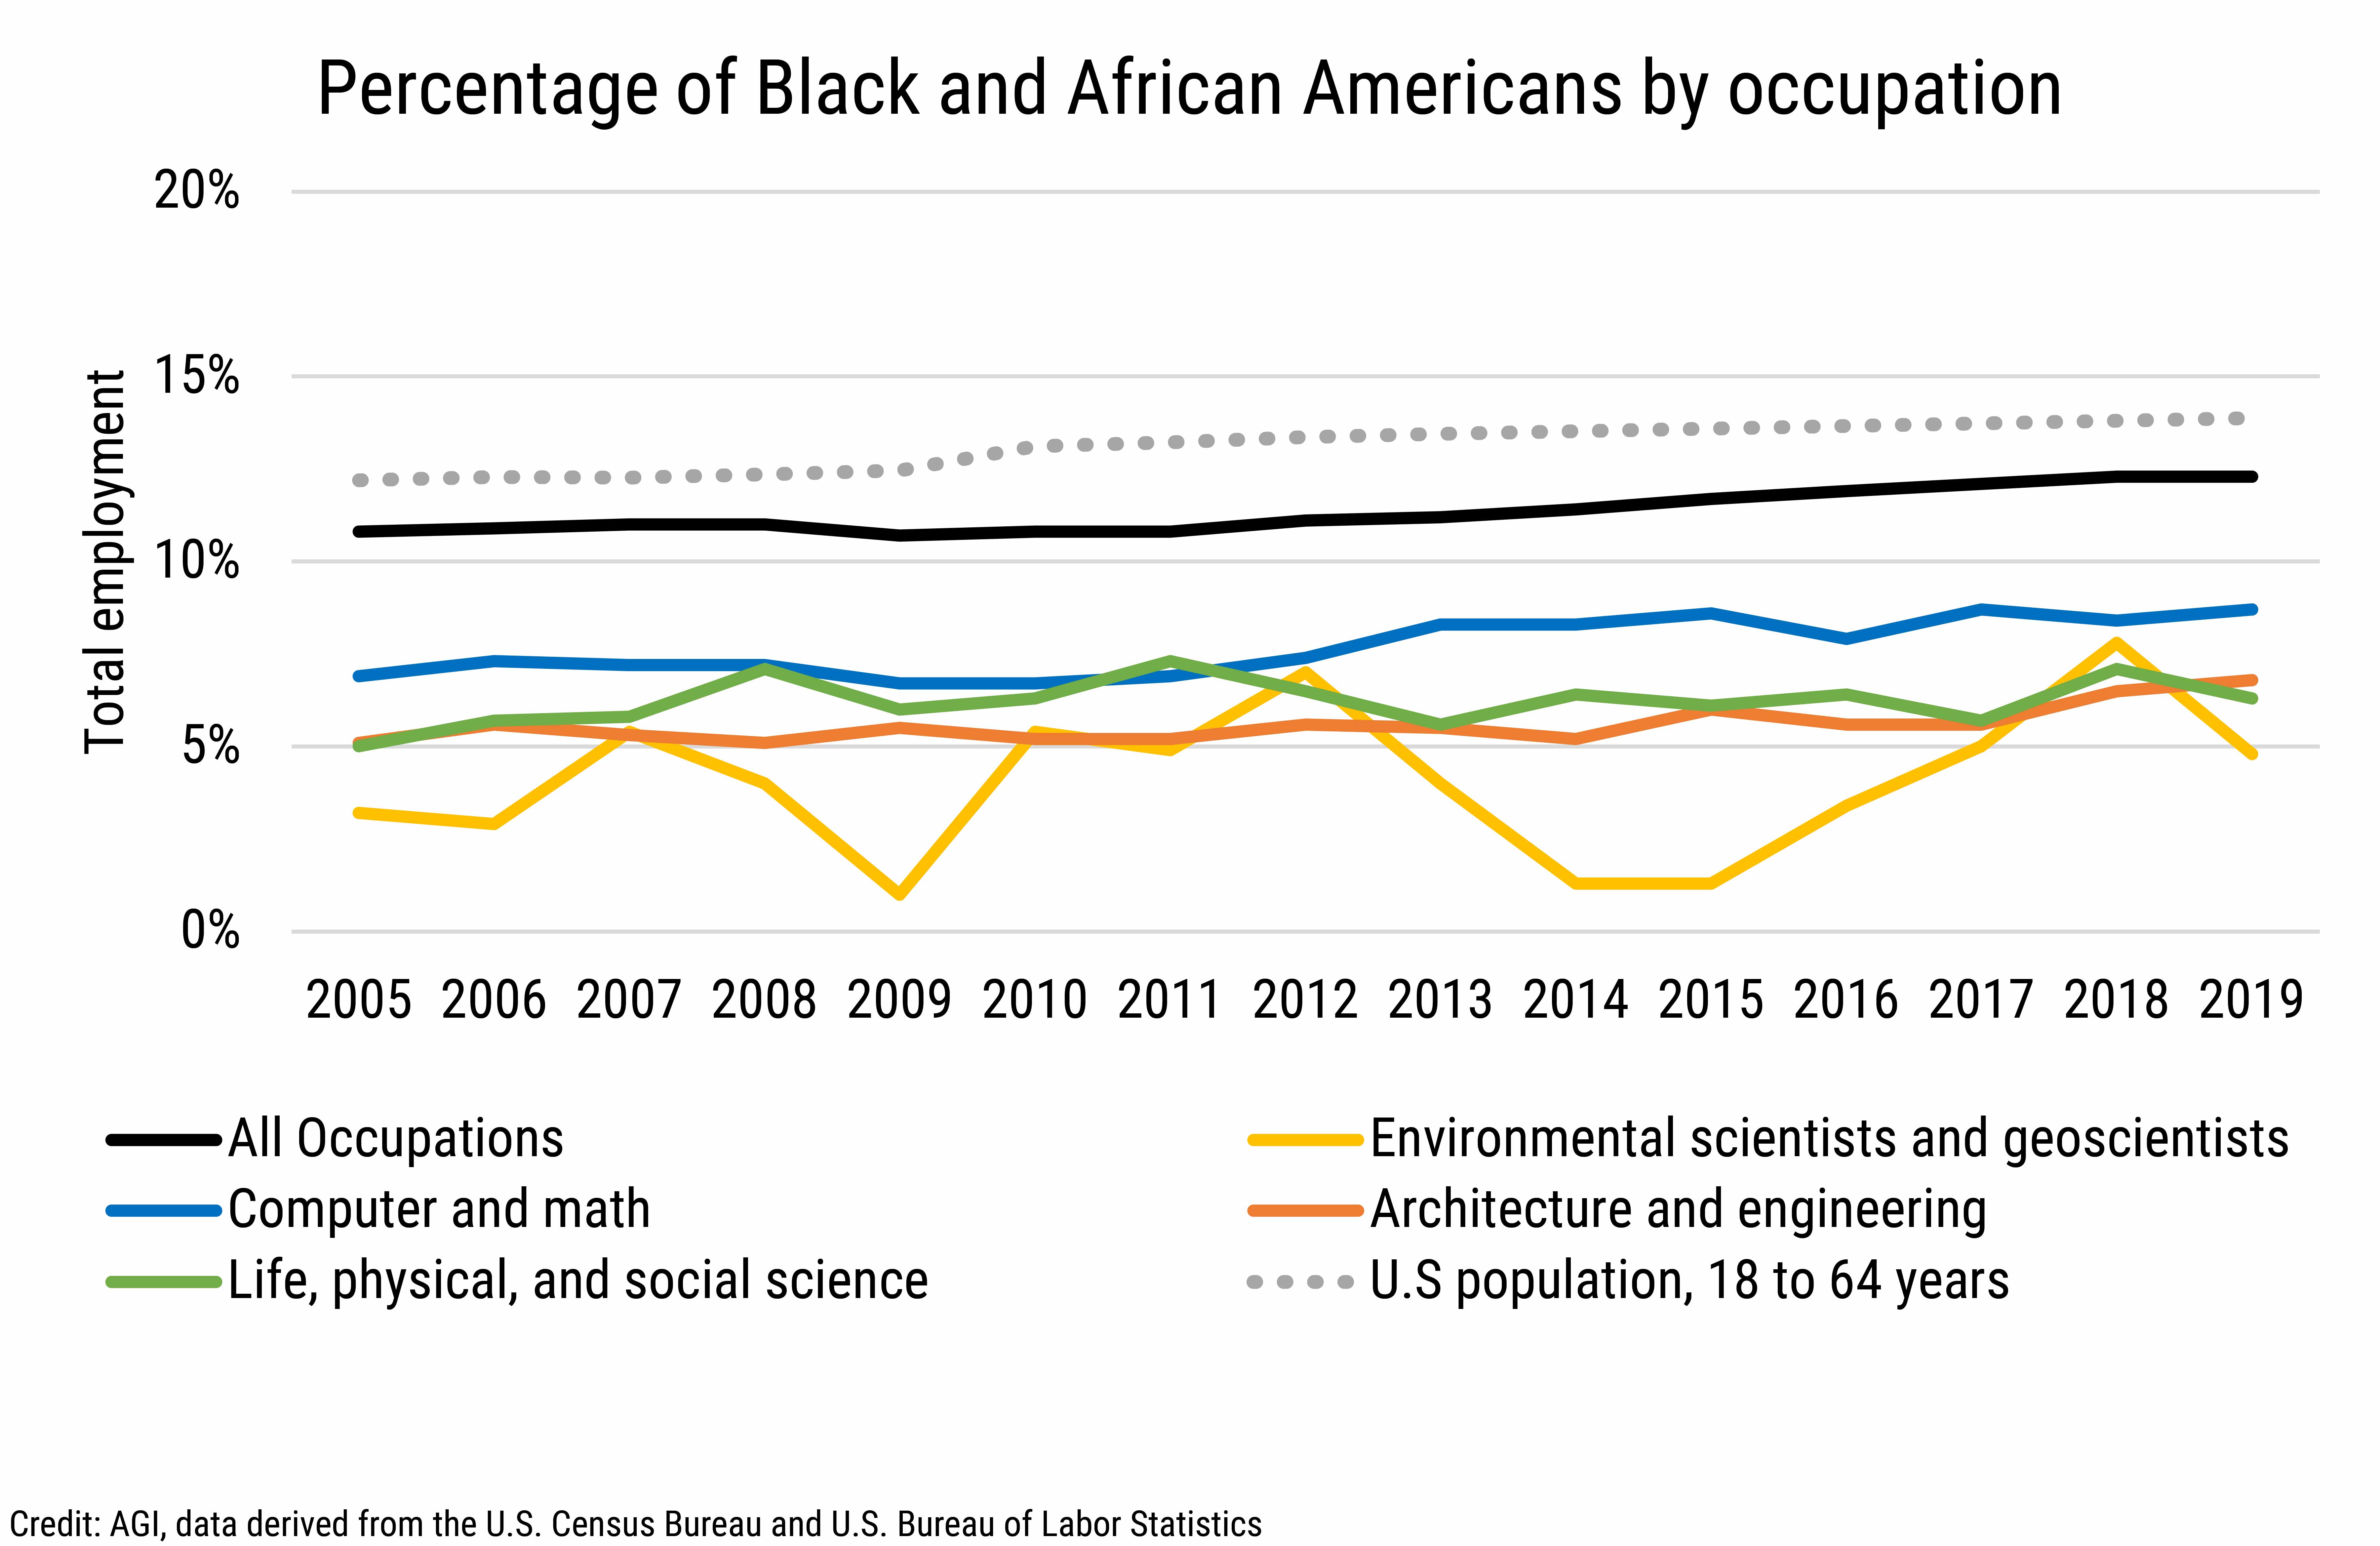 DB2020-023 chart04-Percentage of Black and African Americans by occupation (Credit: AGI, data derived from the U.S. Census Bureau and U.S. Bureau of Labor Statistics)